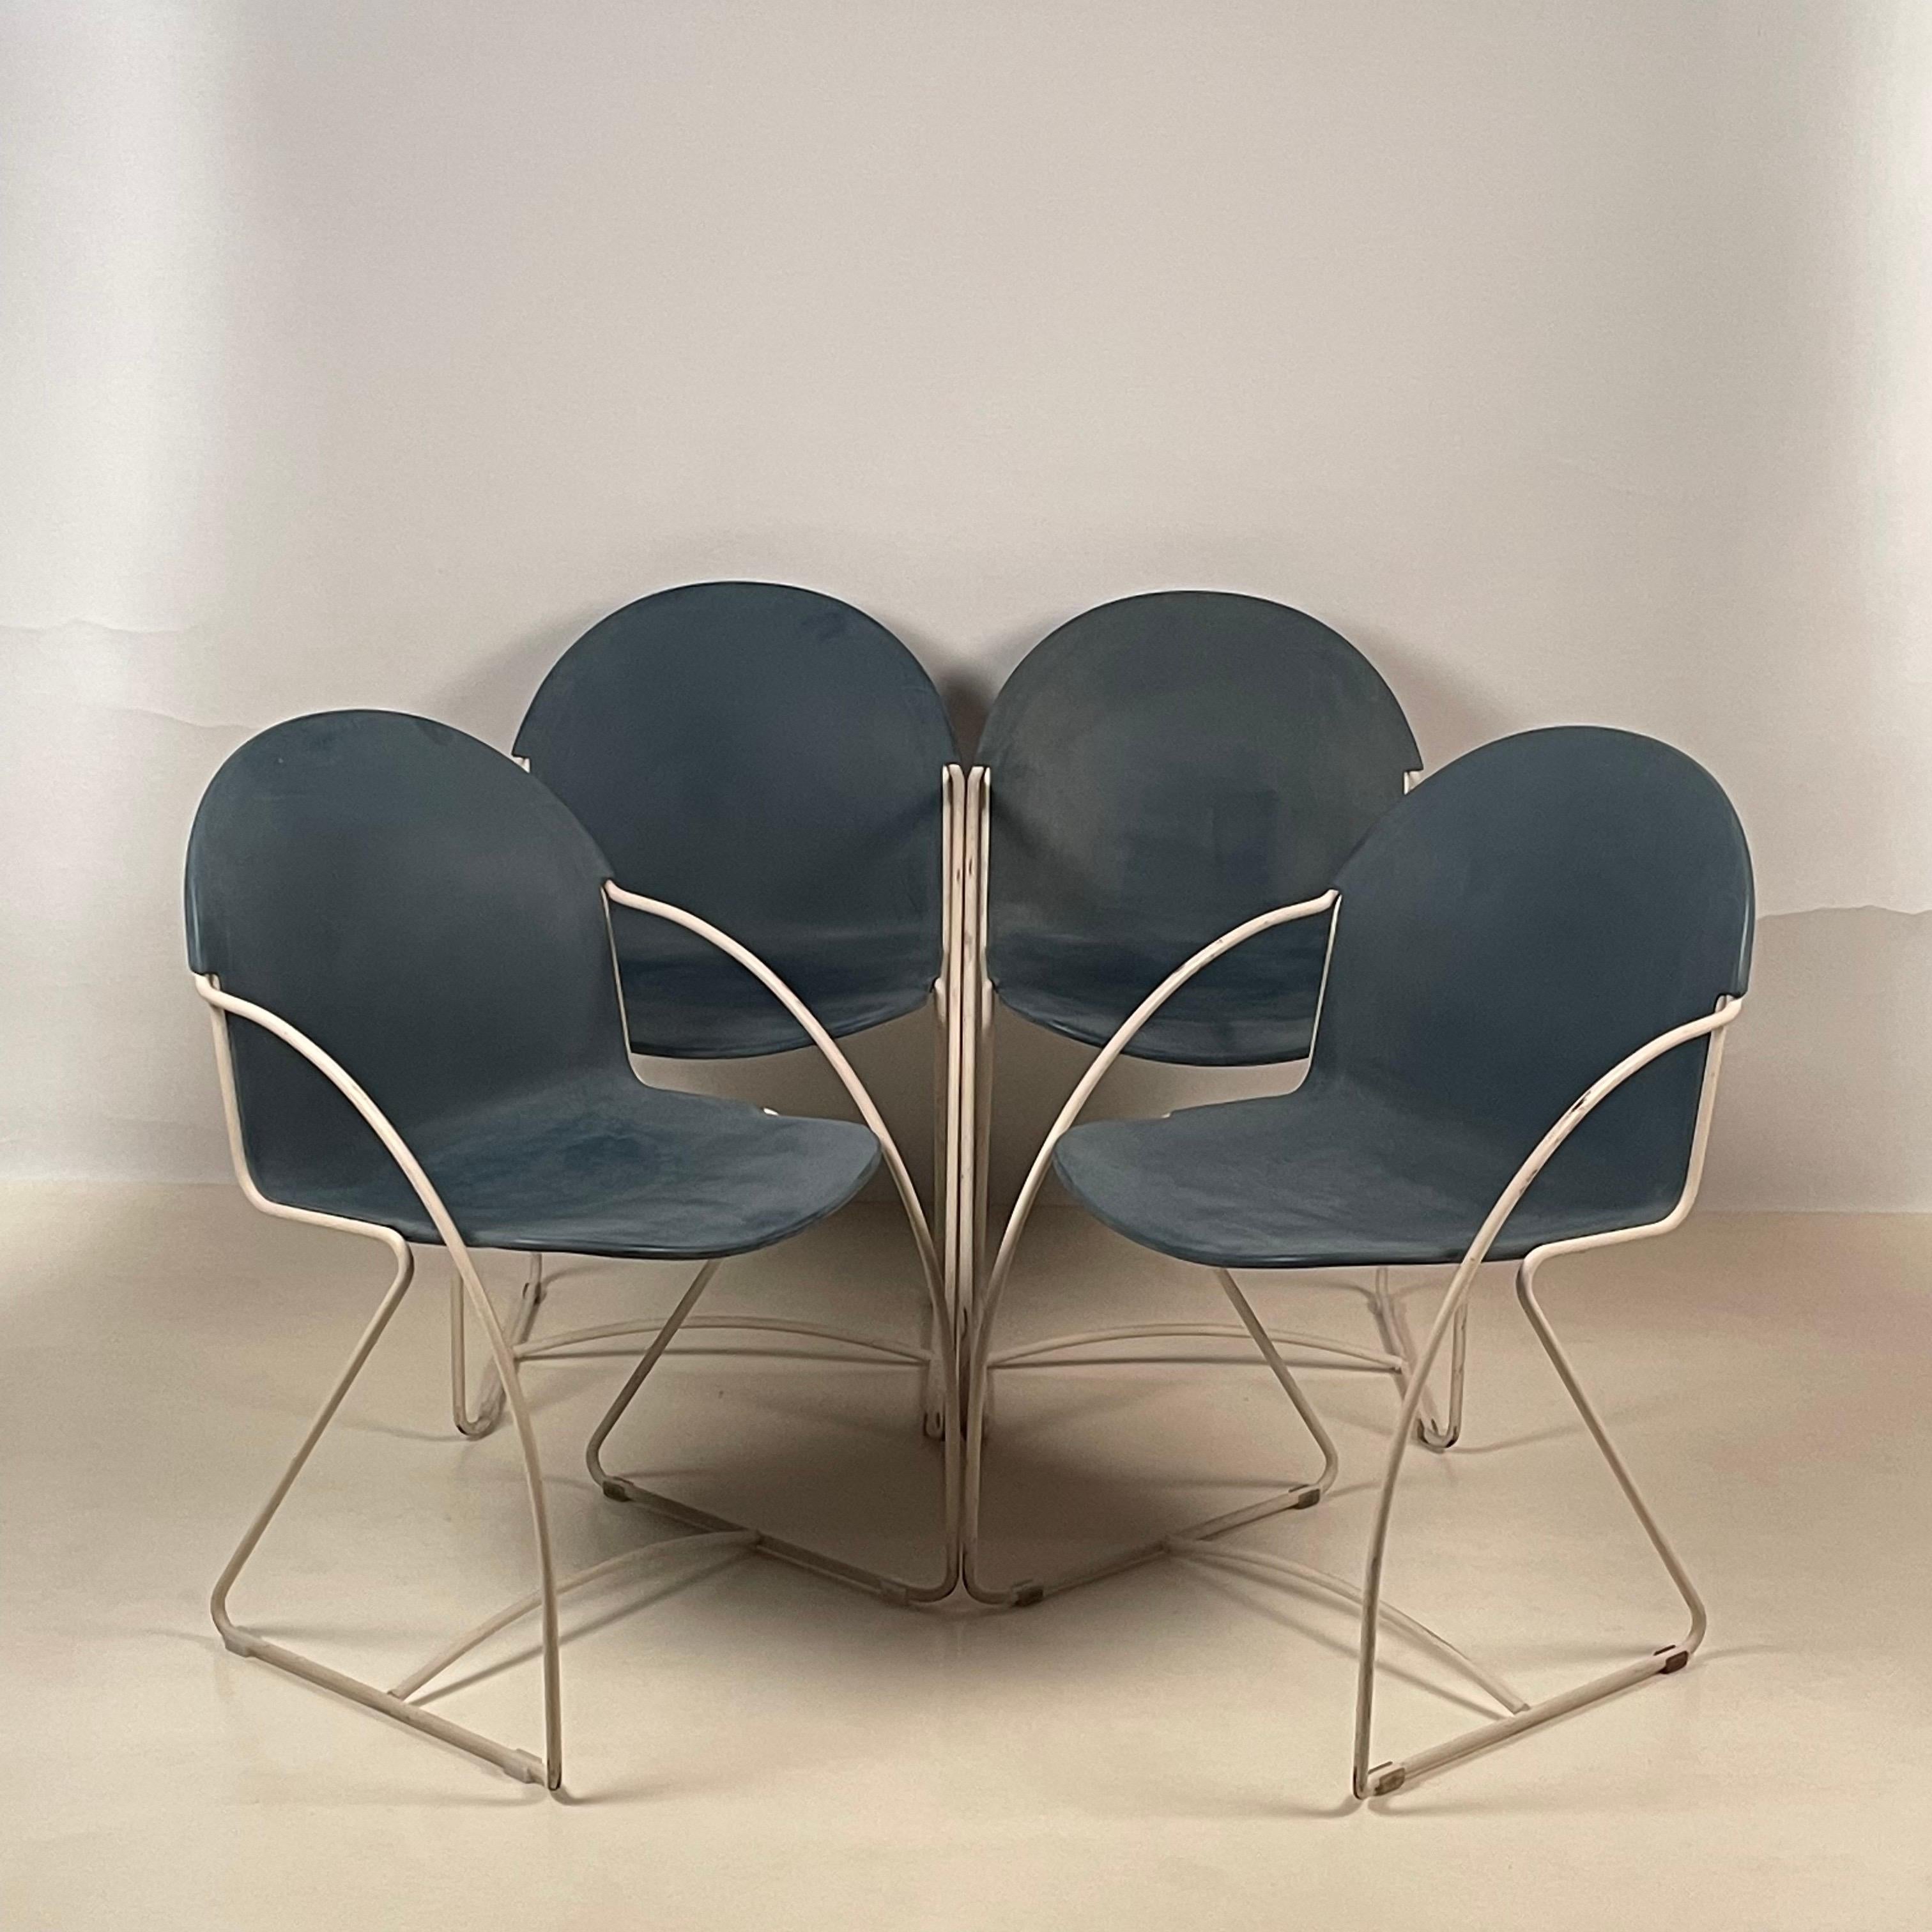 Set of 4 enameled indoor / outdoor post-modern stacking shell chairs.

Neat design. Very robust and comfortable.